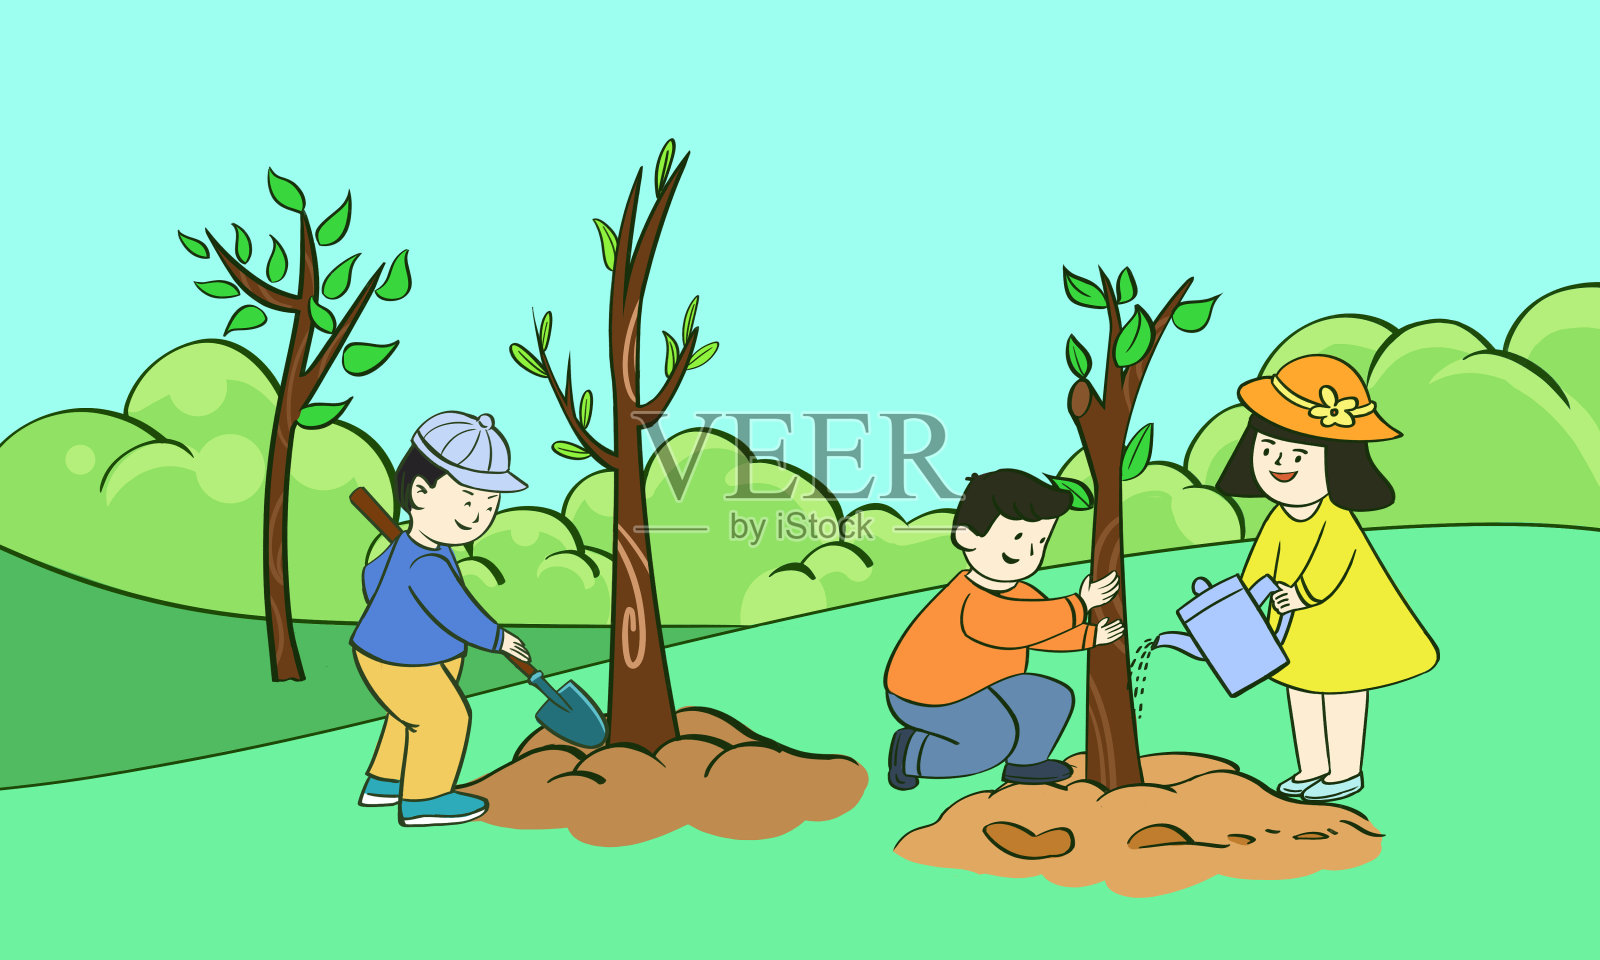 Kids planting trees in arbor day forest illustration image_picture free ...